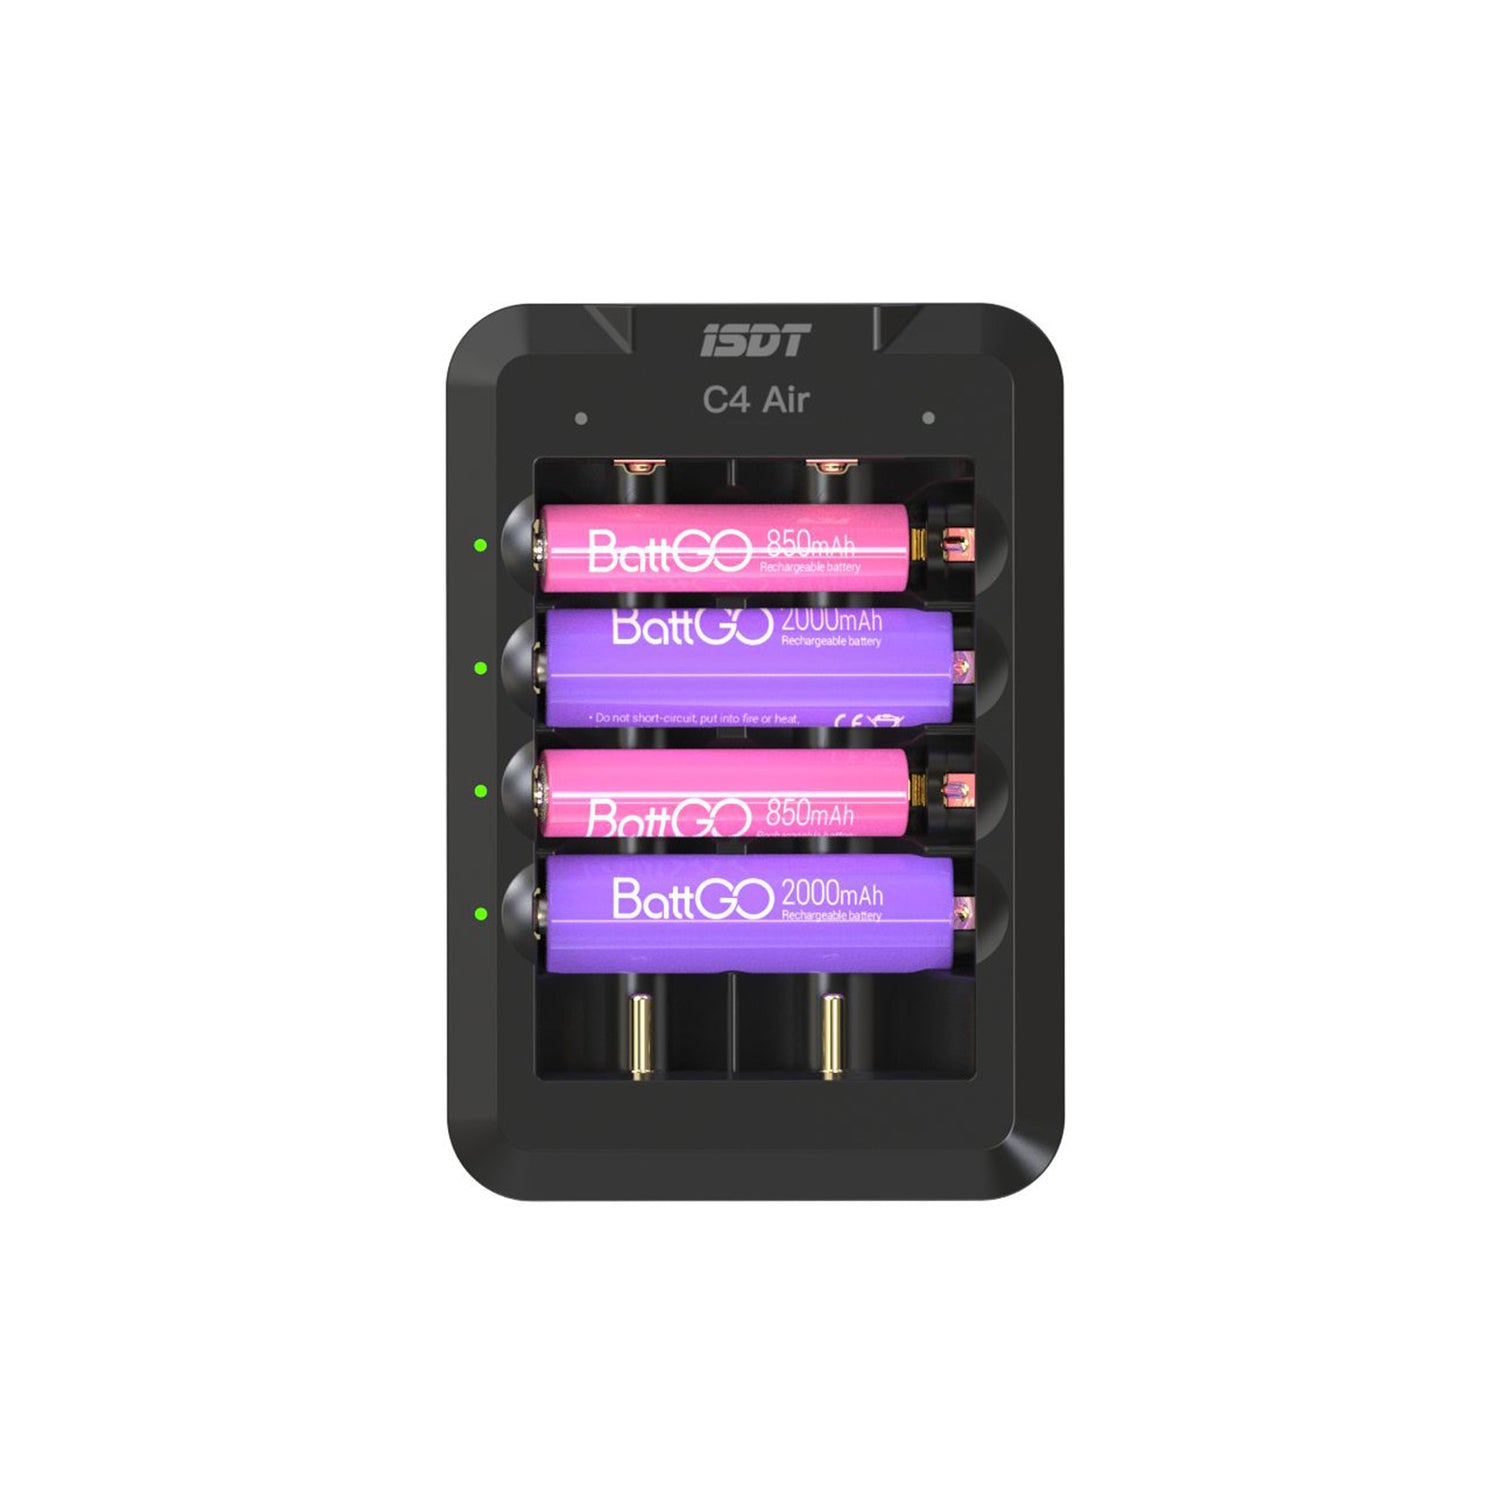 C4 Air Quick Battery Charger, 6 Slots USB C Household Battery Charger with Bluetooth APP Connection Function